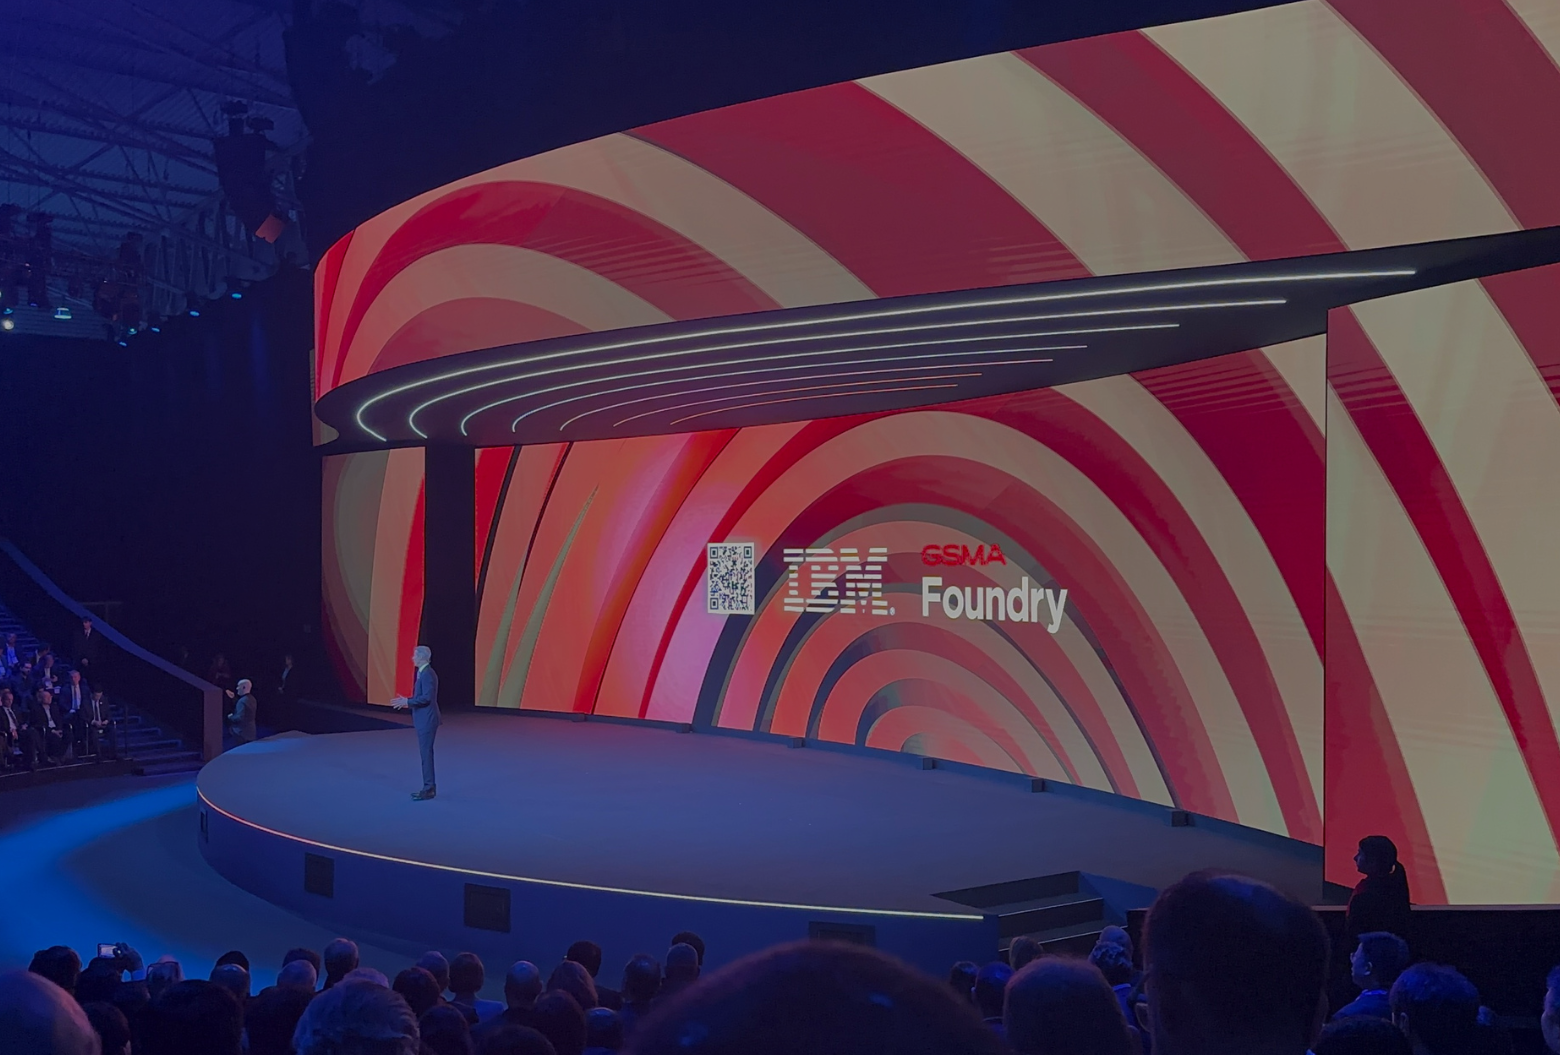 A speaker presents on a curved stage with a large, red and white striped digital screen displaying "gsma foundry" at a tech event.